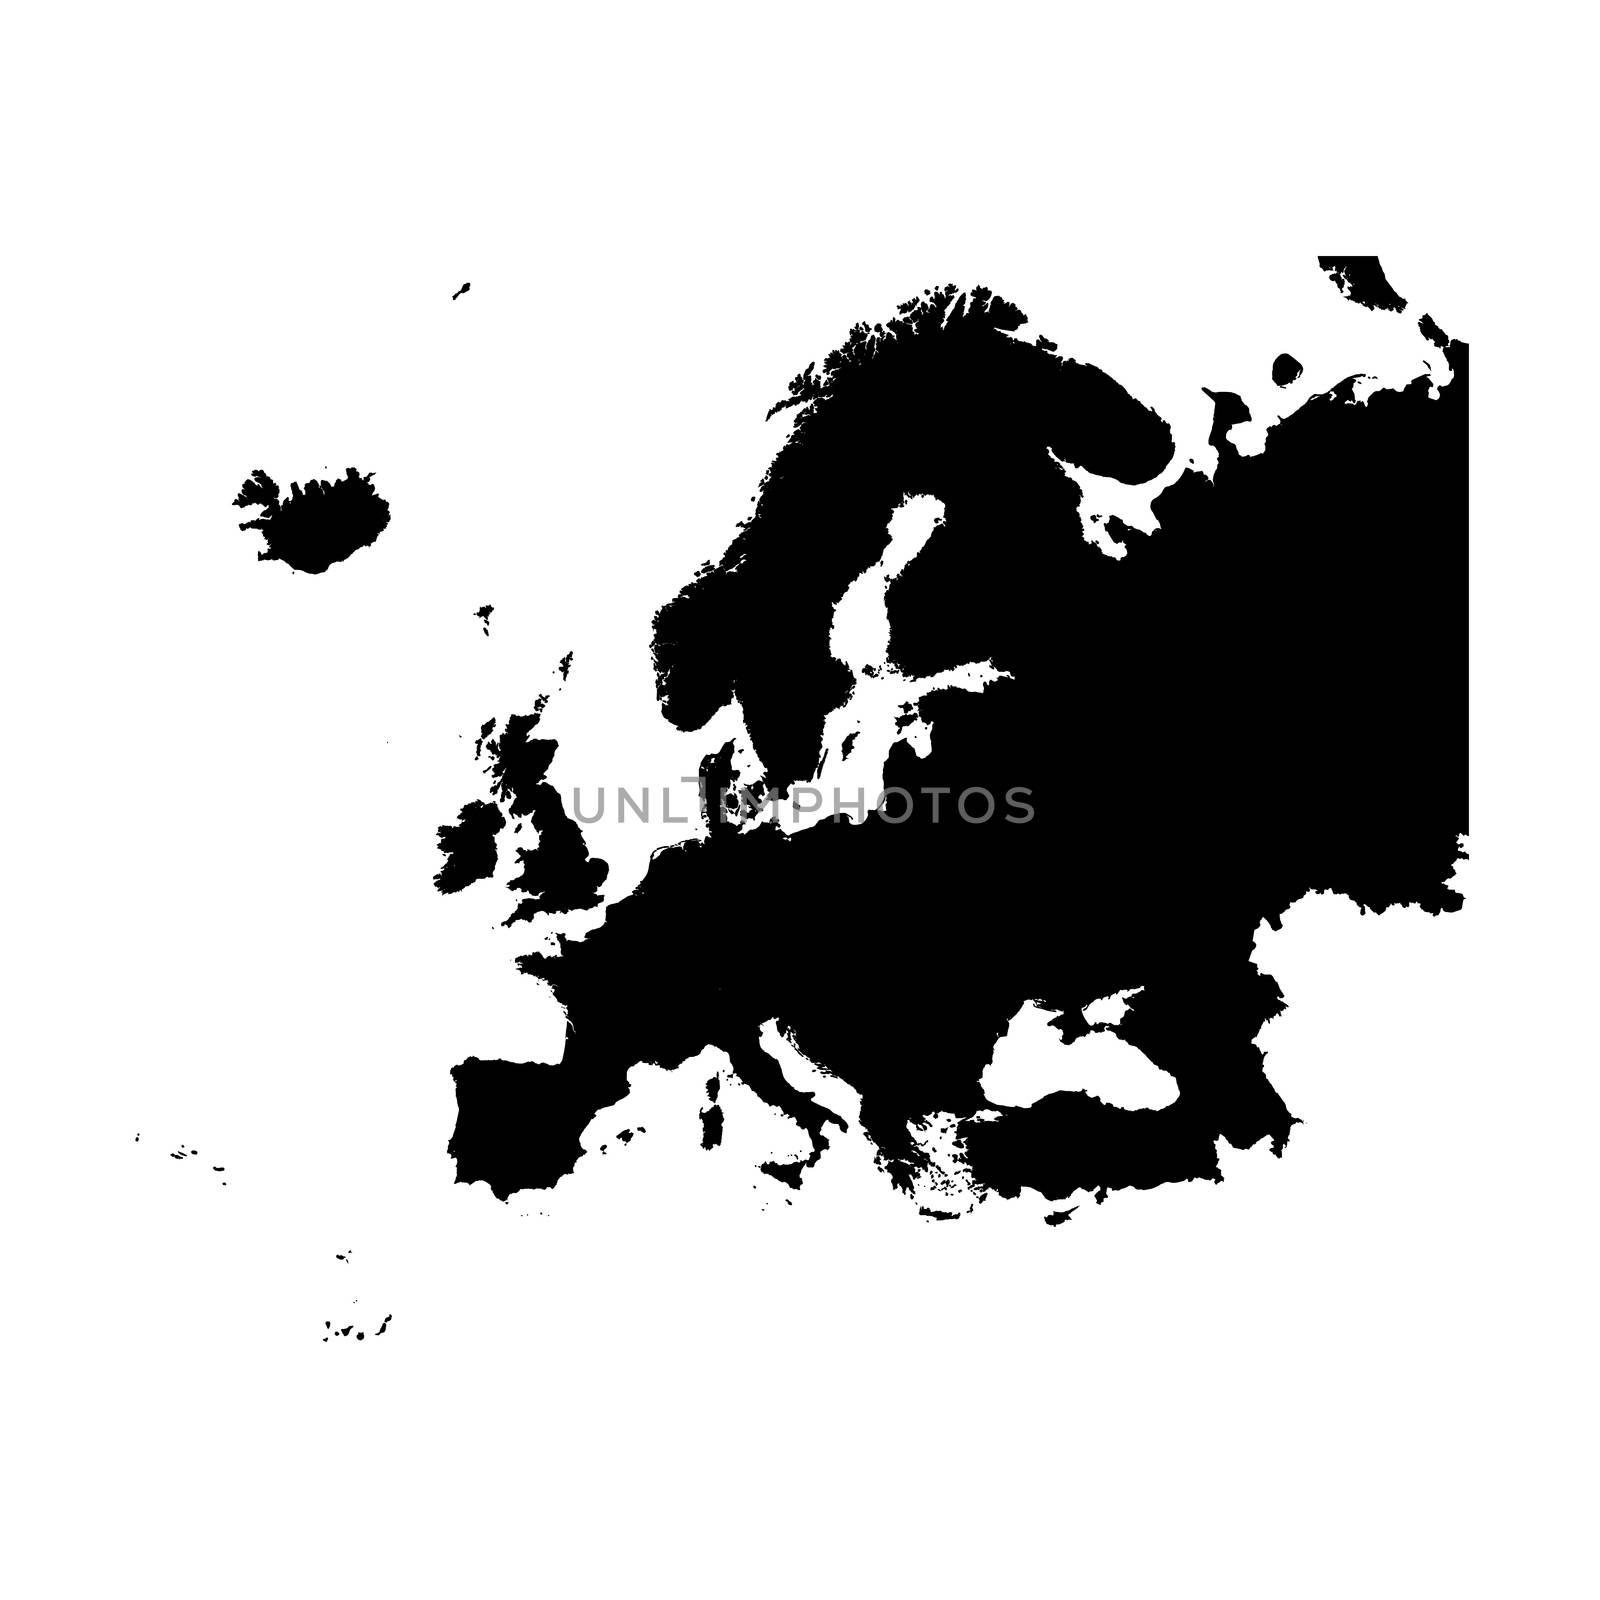 An Illustration on isolated background of the continent of Europe